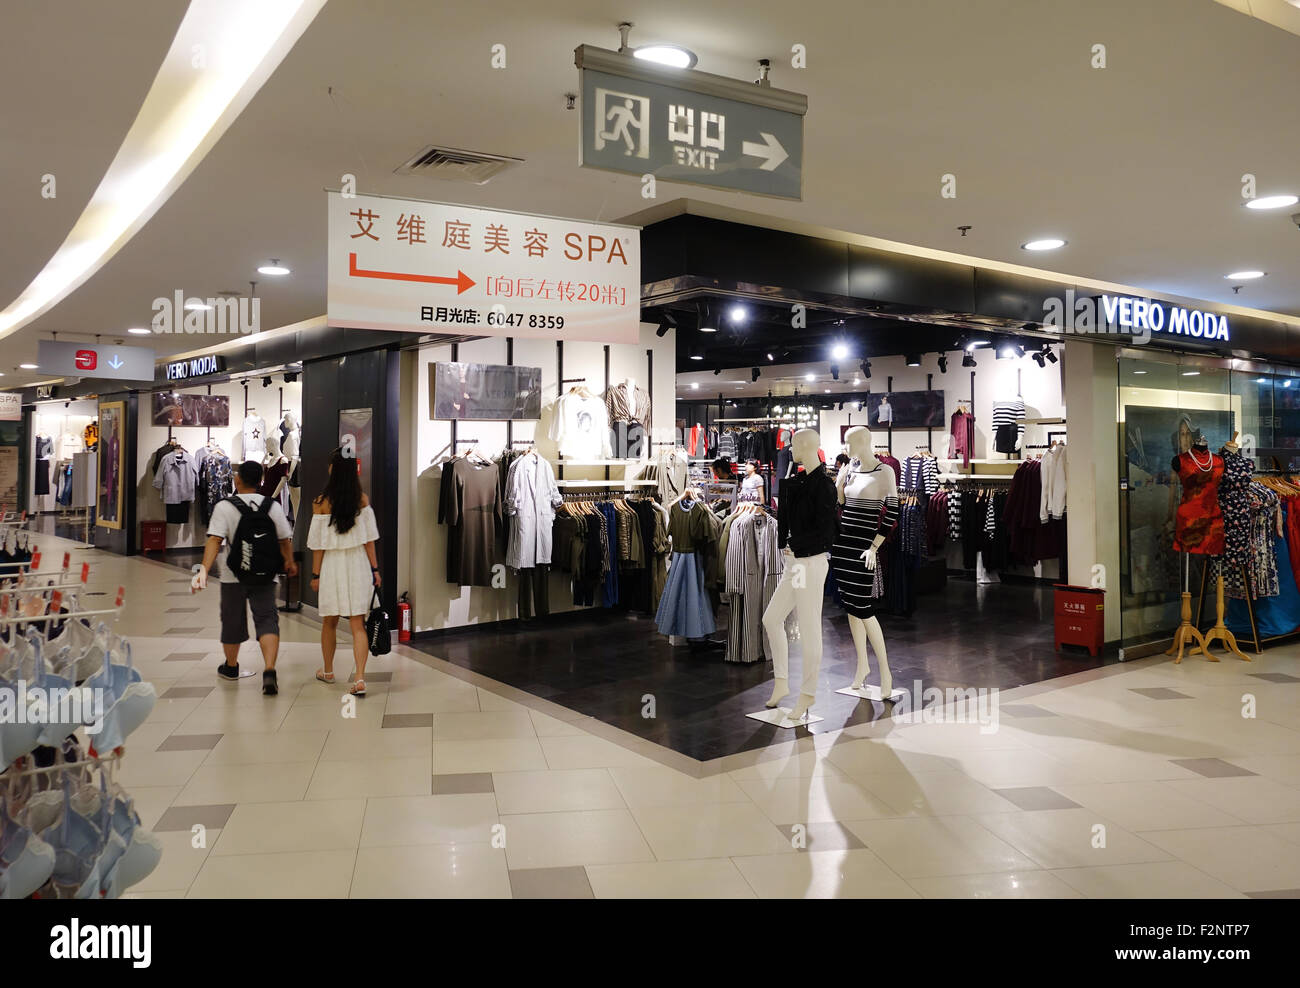 Rejsende Benign implicitte A store of the Danish clothing retail company Vero Moda in Shanghai, China,  30 August 2015. Photo: Jens Kalaene Stock Photo - Alamy